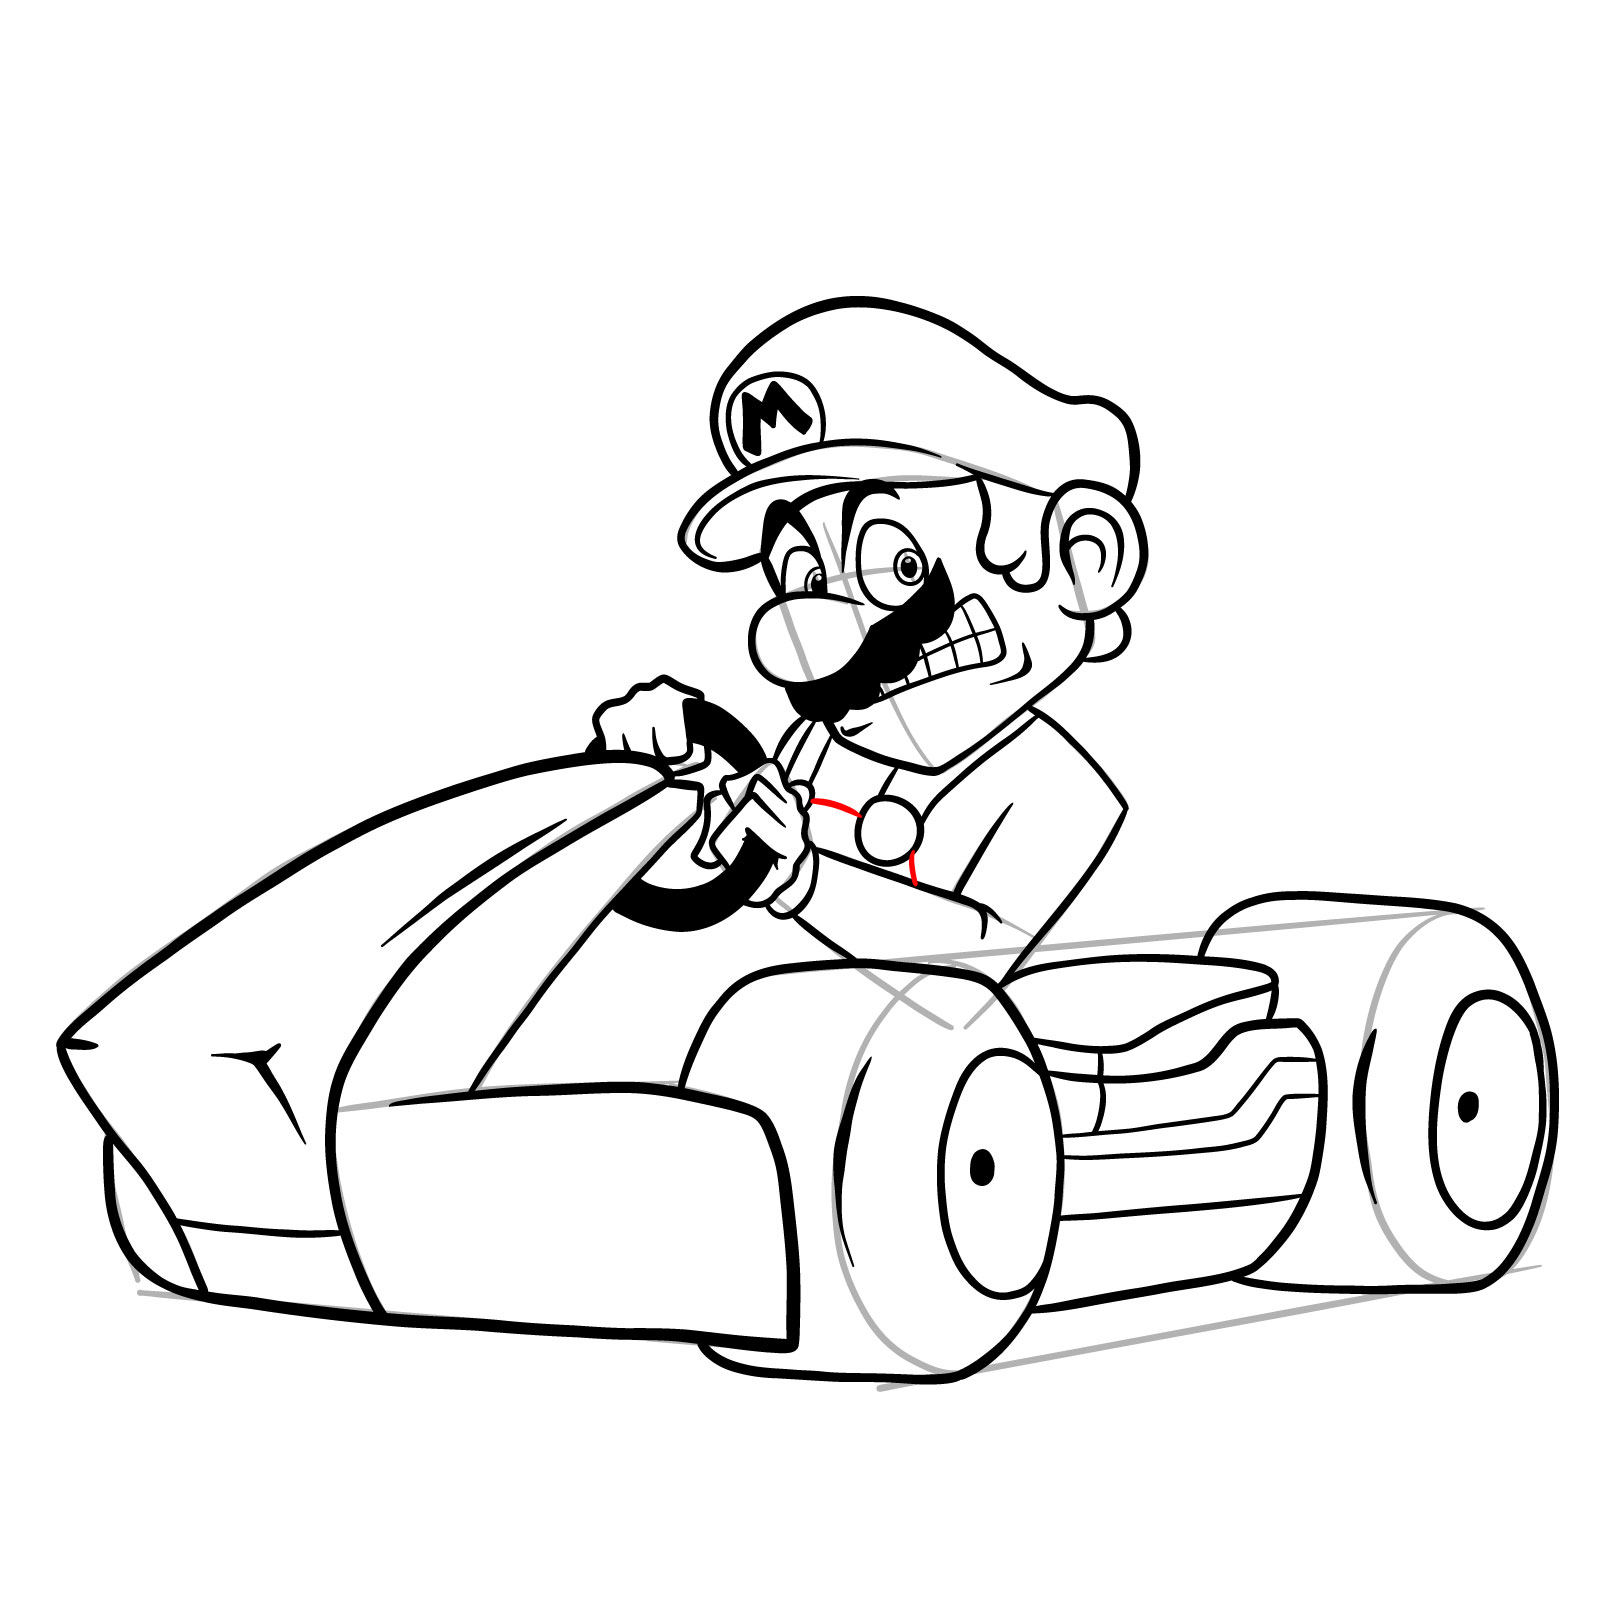 How to draw Race Traitors Mario - step 35